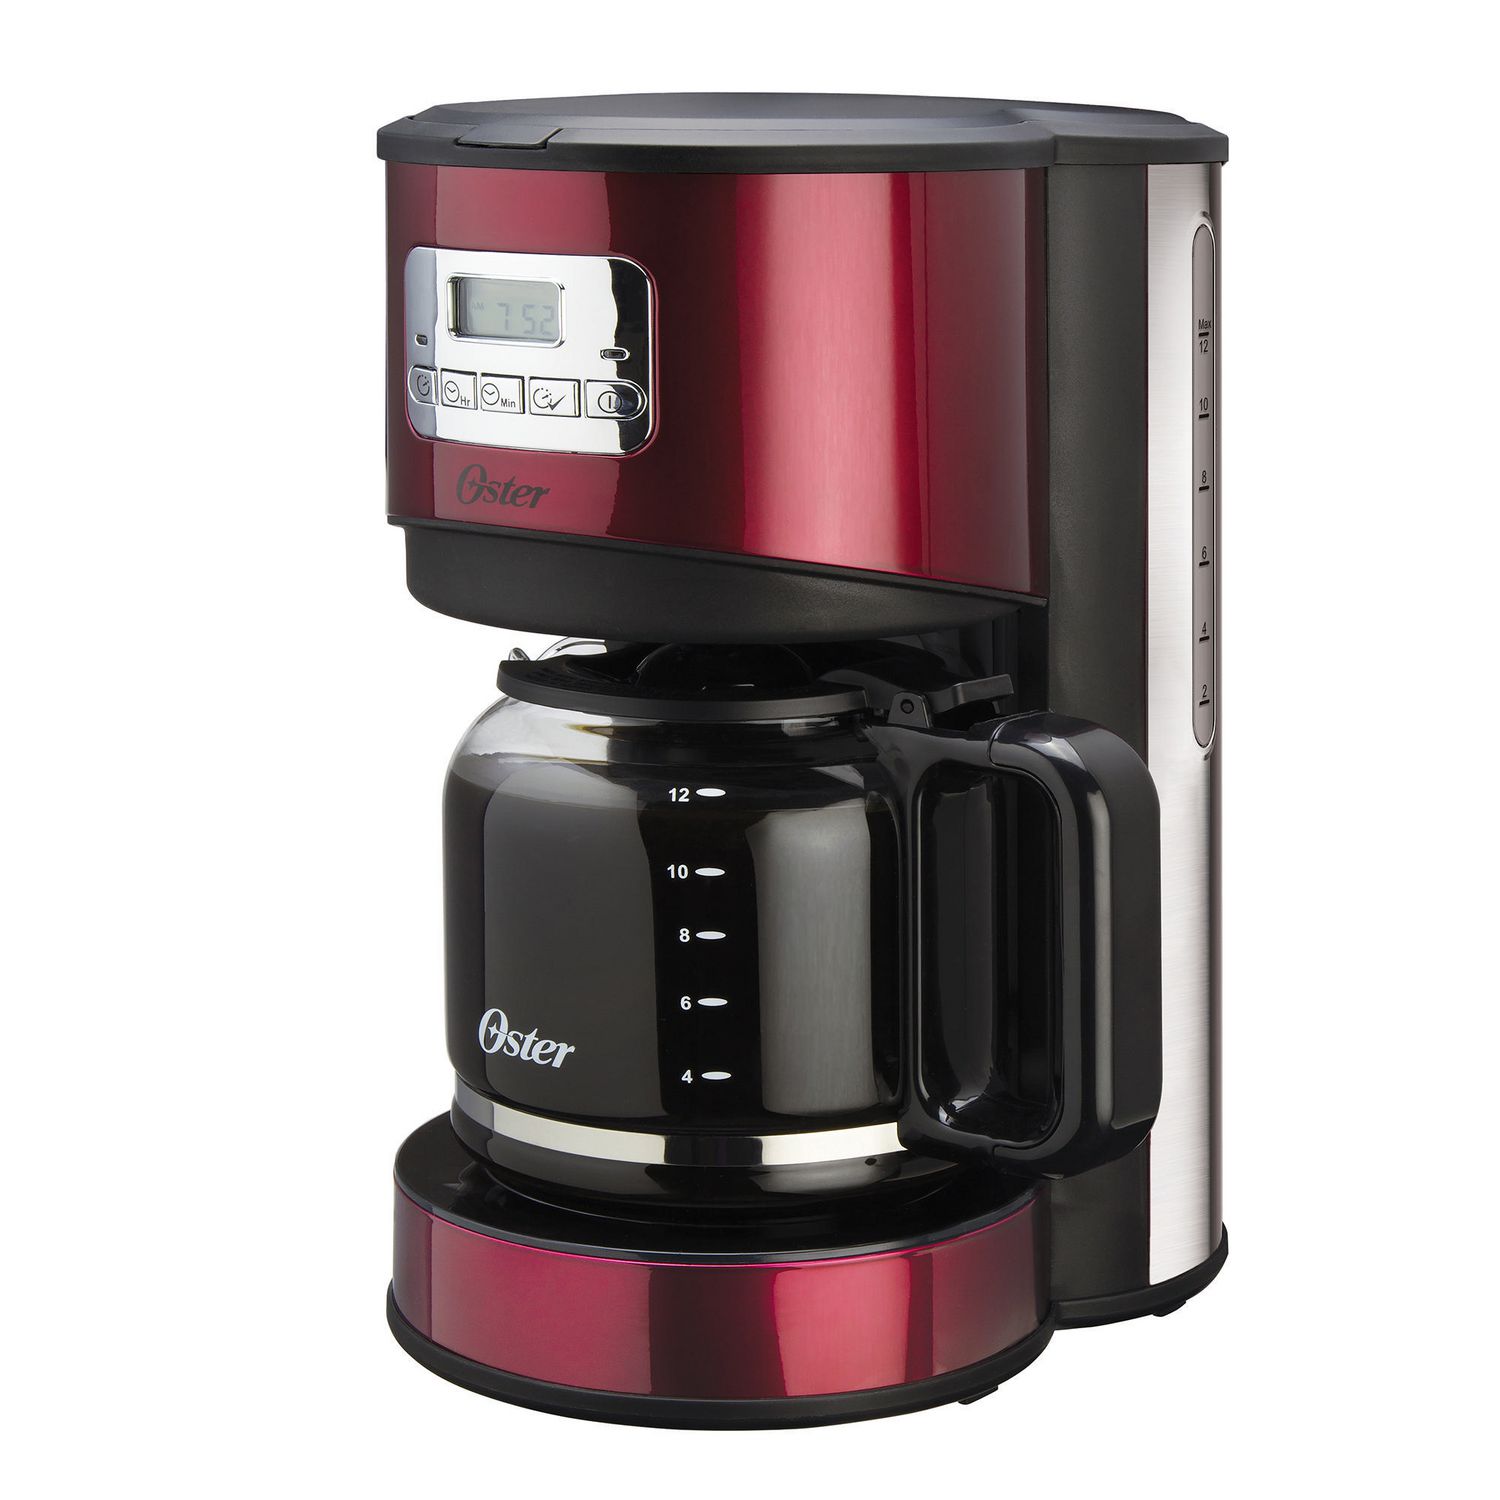 Oster® 12-Cup Programmable Coffee Maker | Walmart Canada